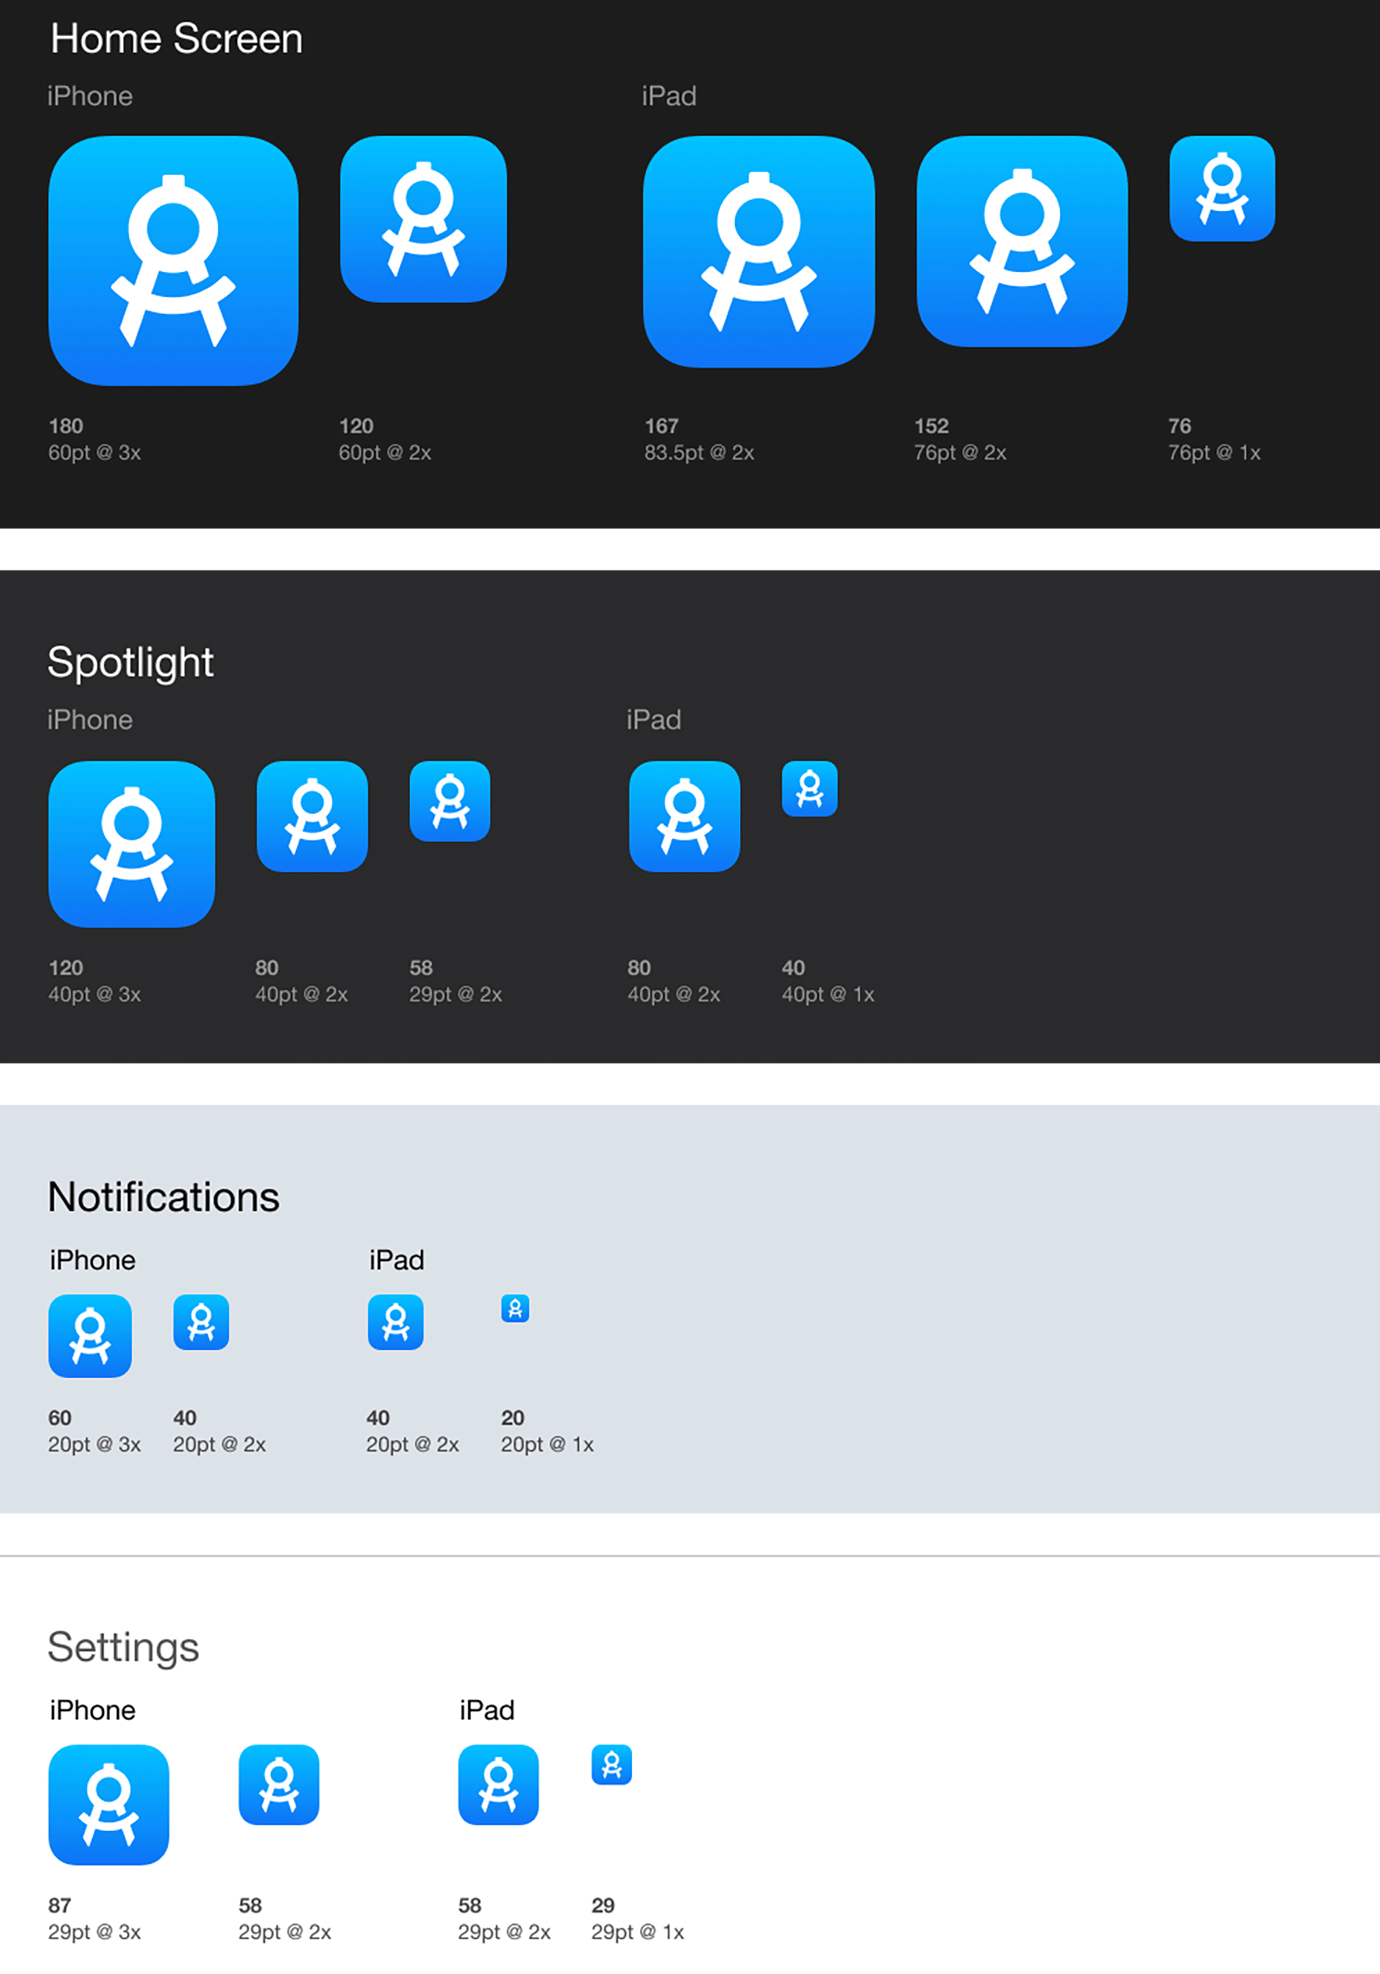 A single, blue iOS icon displayed in many different sizes, each with a label denoting how the operating system resizes icons across different OS contexts like the home screen, Spotlight search results, notifications, and settings.